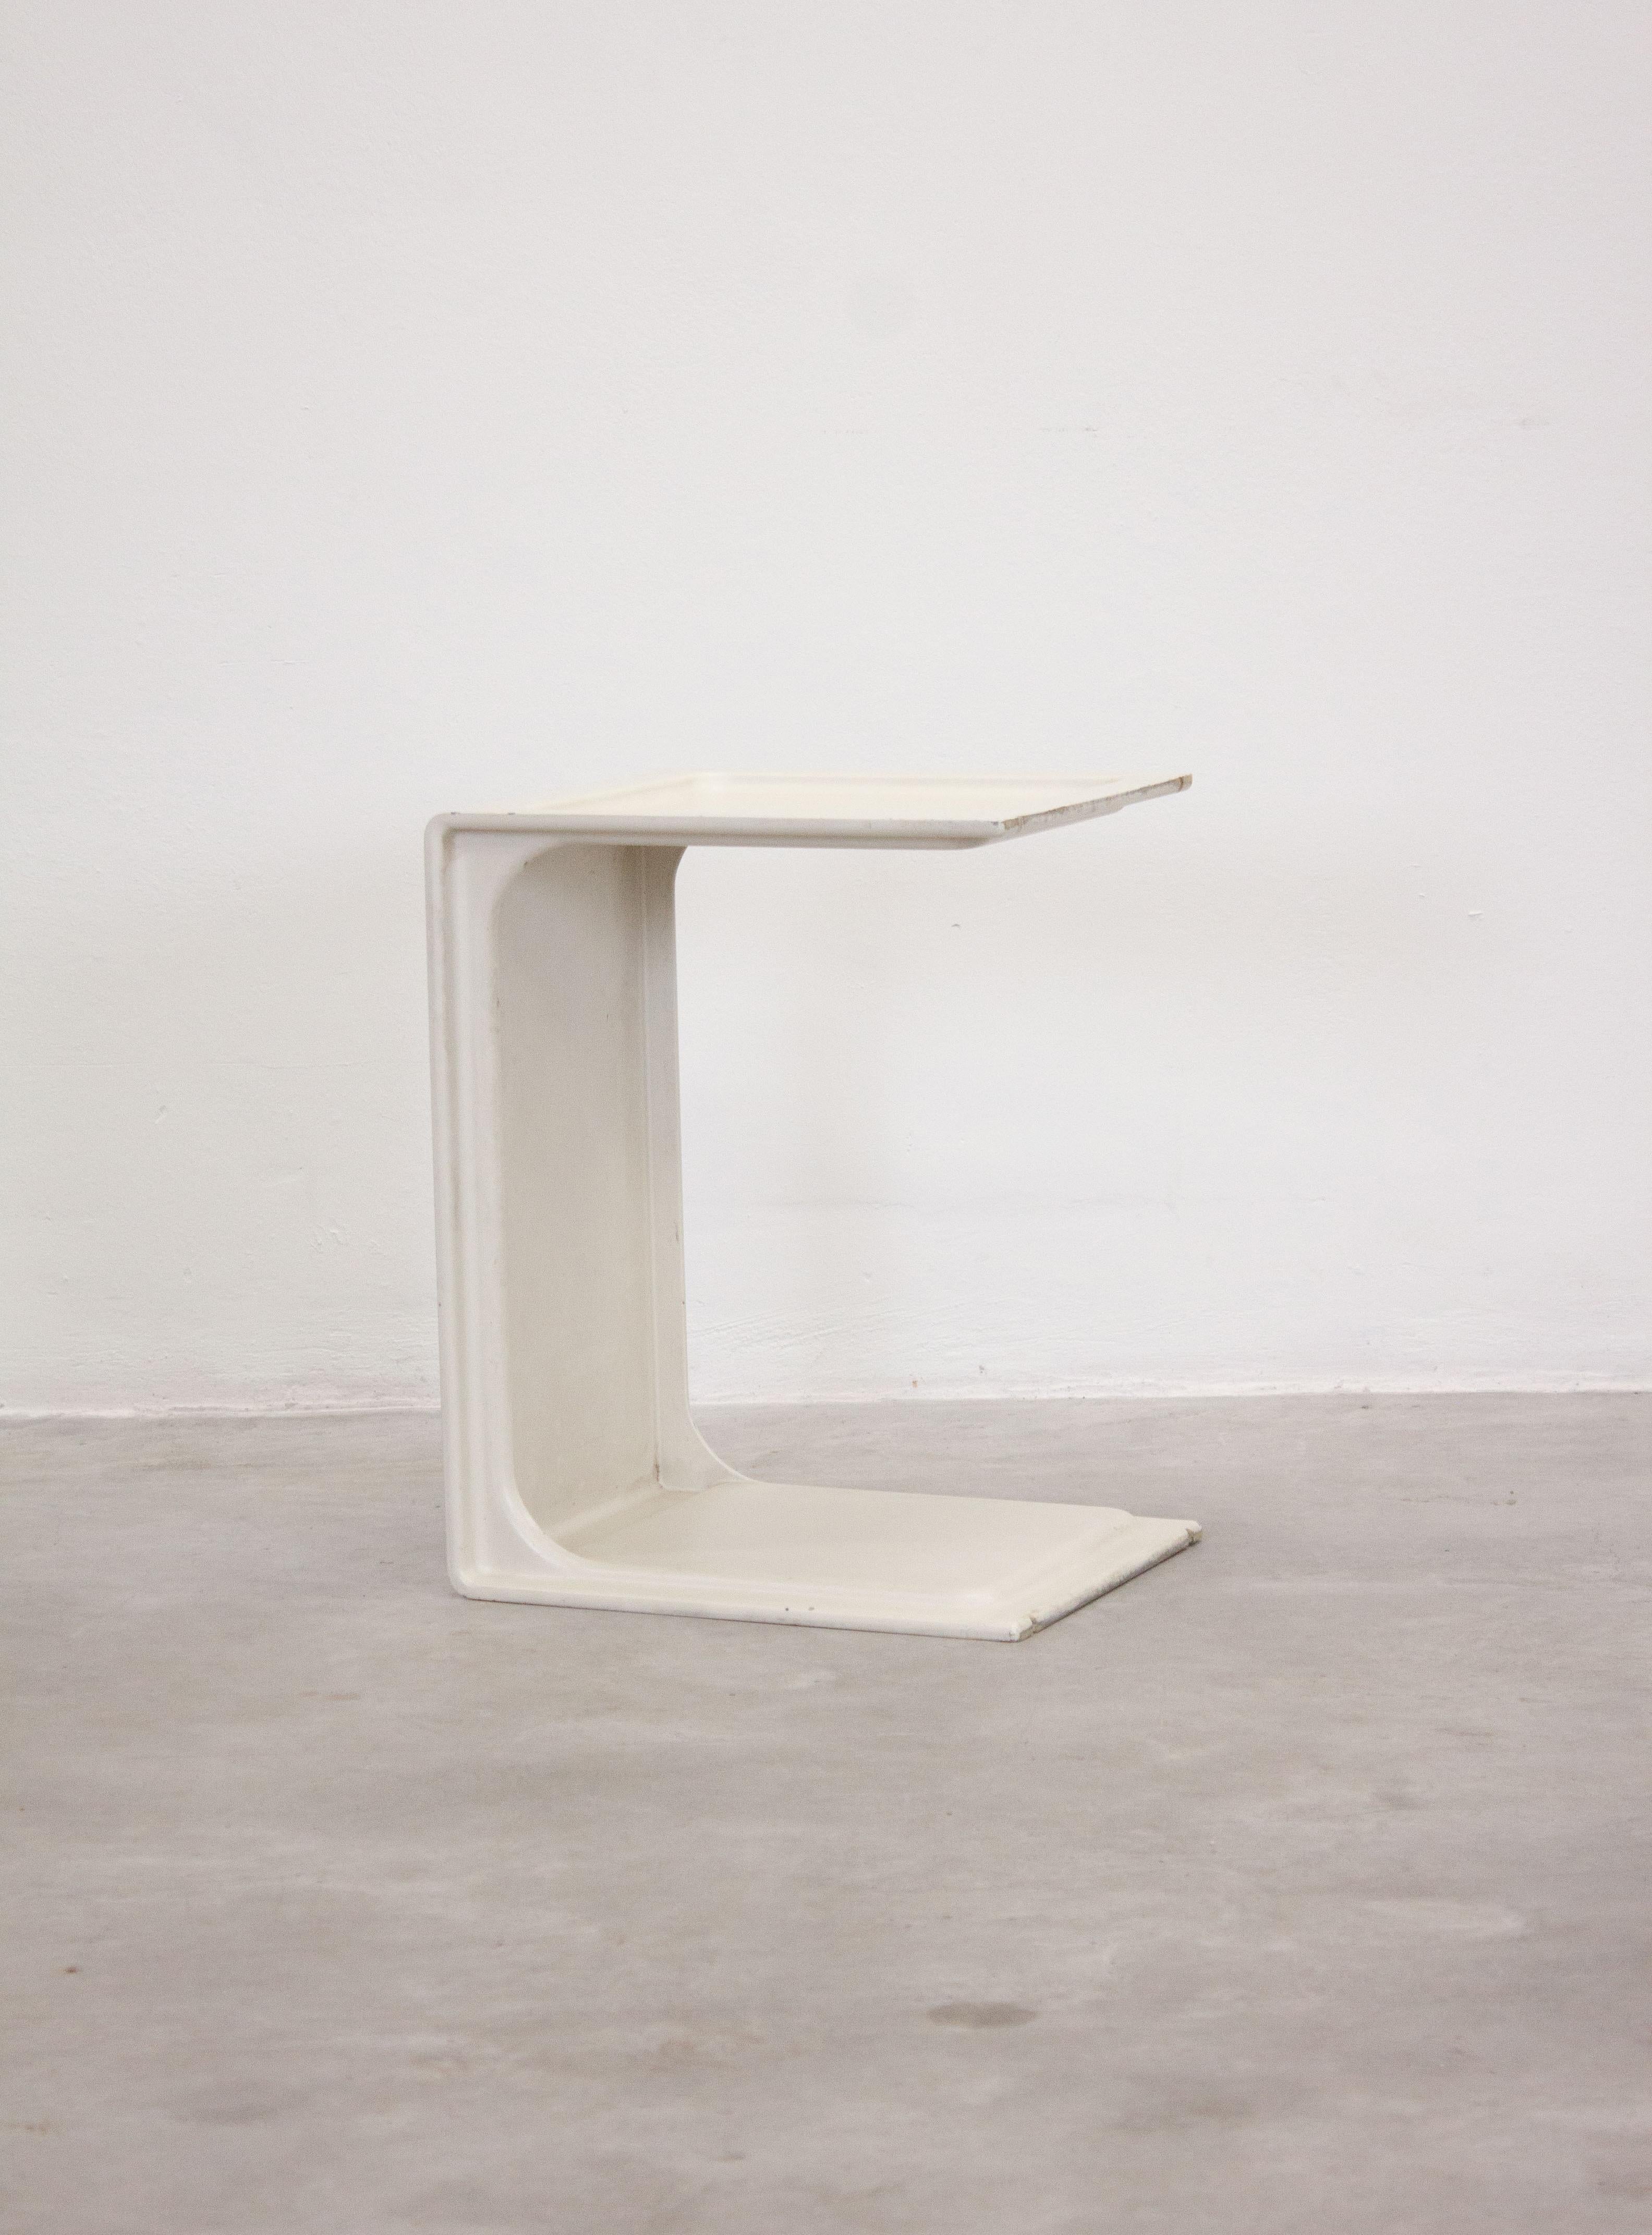 Vitsoe model 621 side table designed by Dieter Rams. This is an older version from the 1960s and has an off-white, maybe even a bit greyish color. Rams designed this side table in 1962 along with his 620 Chair Programme. It was last produced in the